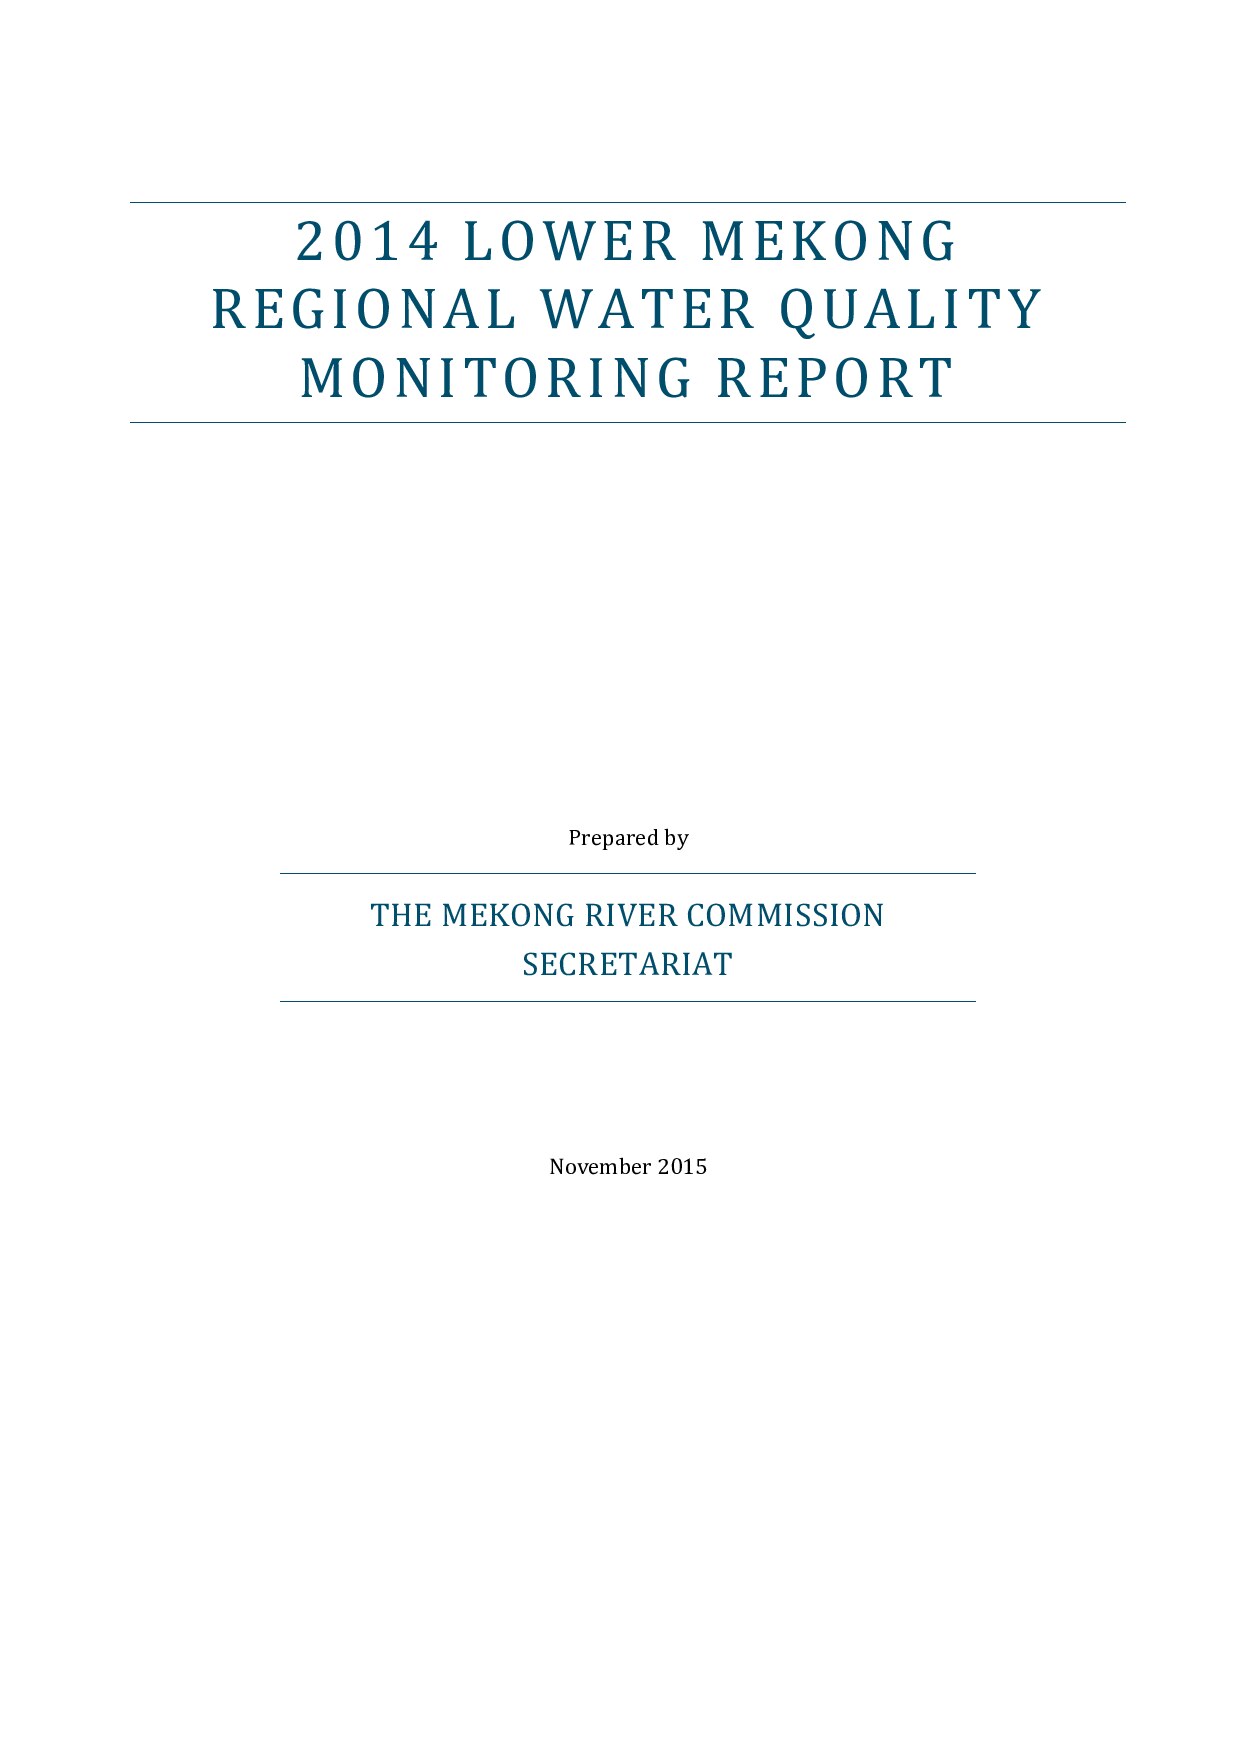 2014 LOWER MEKONG REGIONAL WATER QUALITY MONITORING REPORT